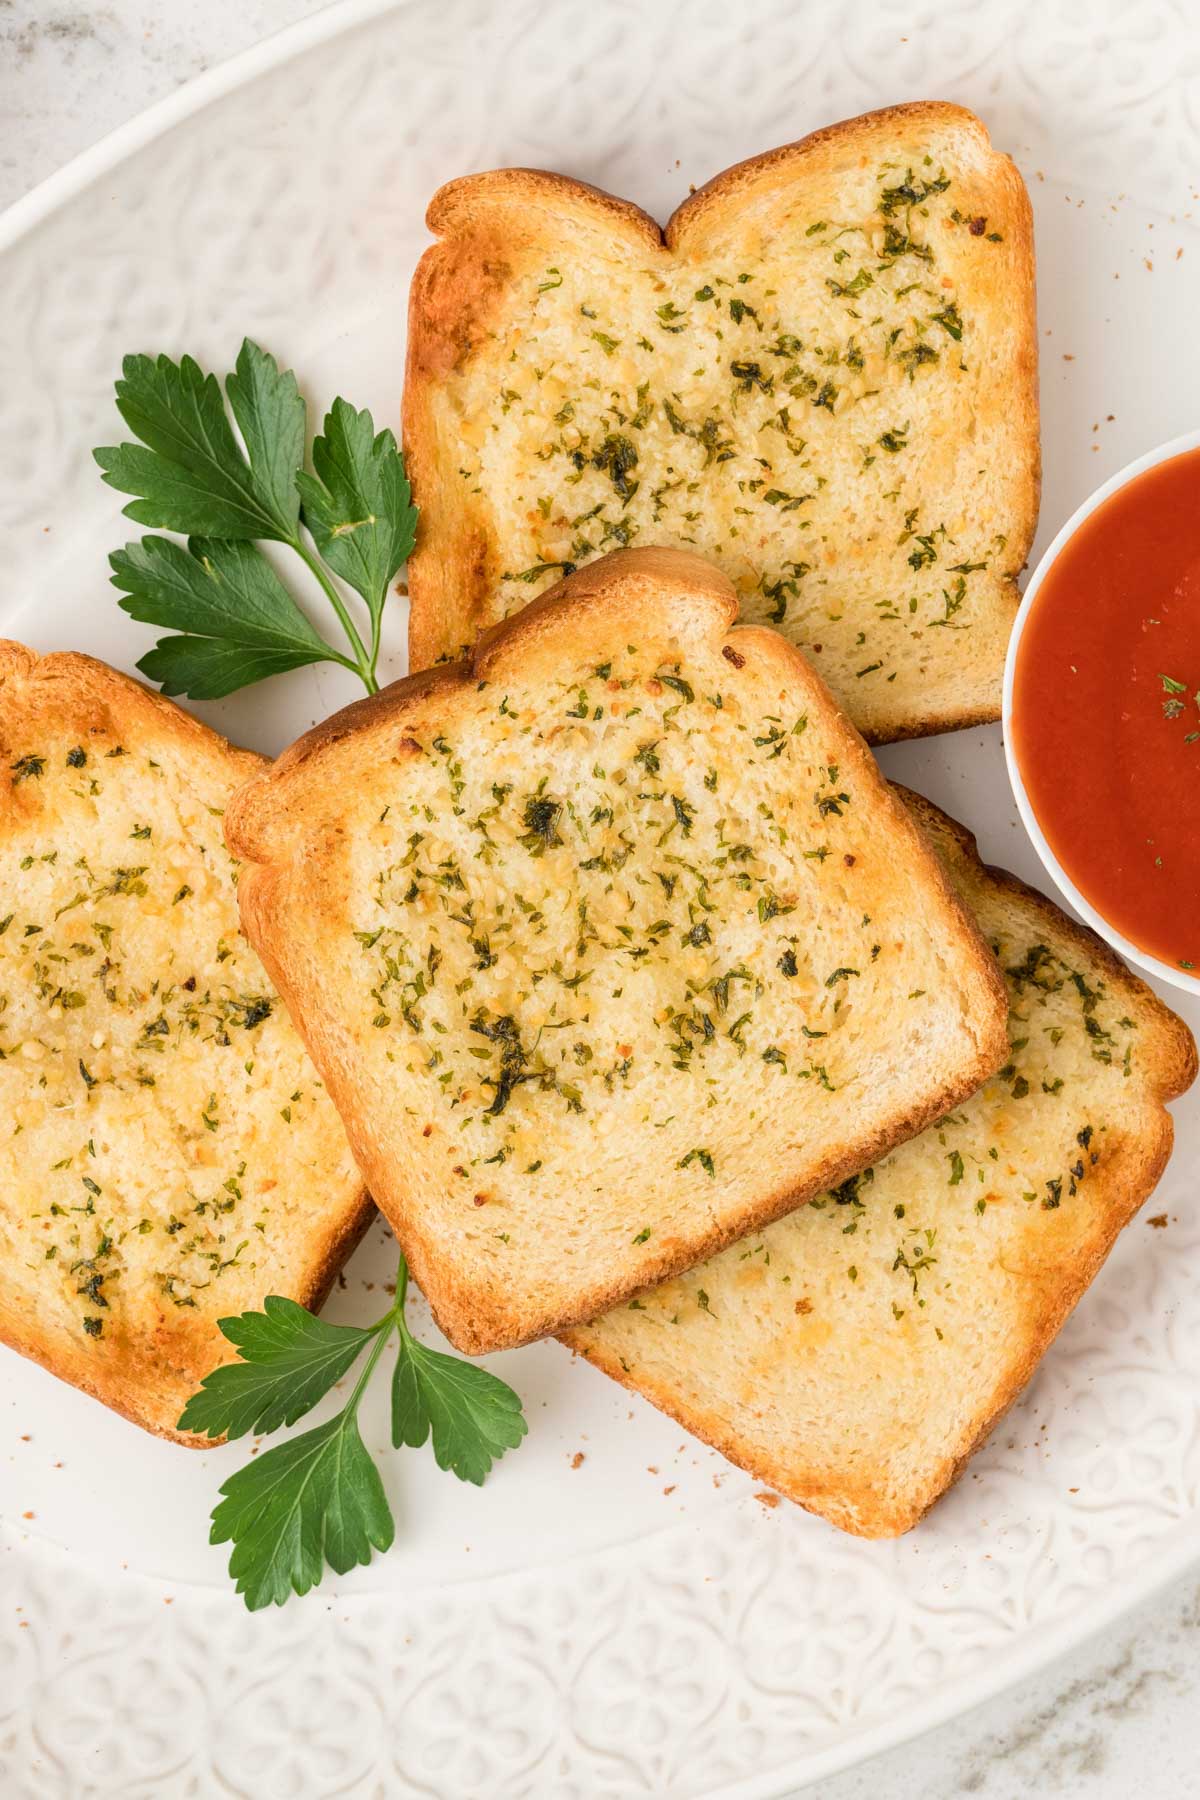 4 slices of Texas Toast garlic bread on a white plate with parsley leaves. 